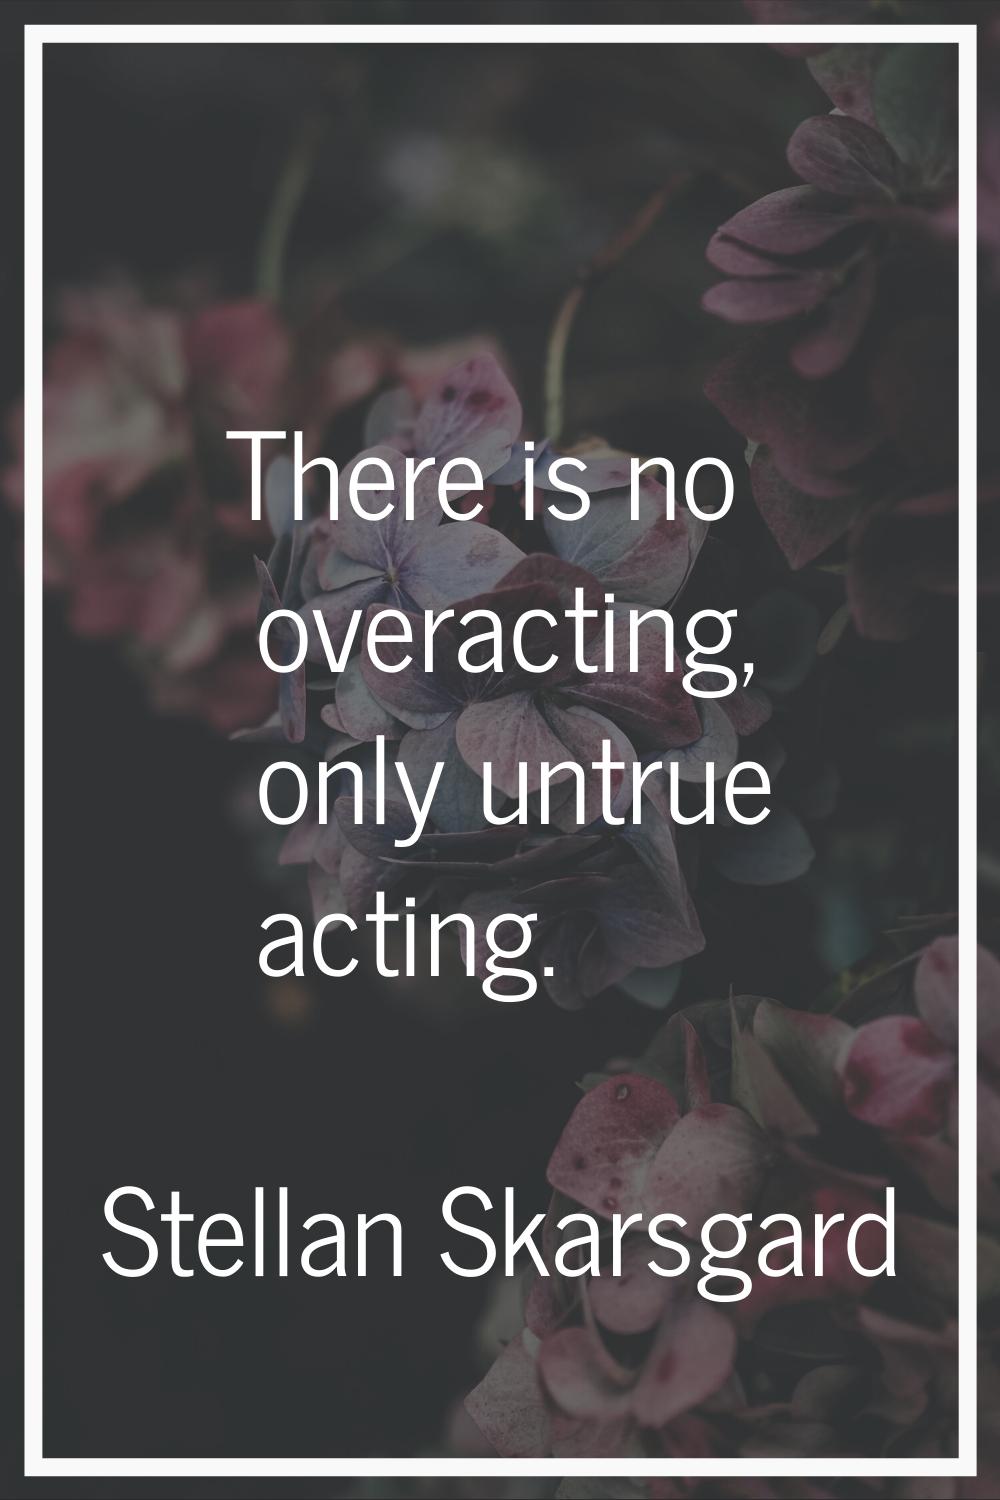 There is no overacting, only untrue acting.